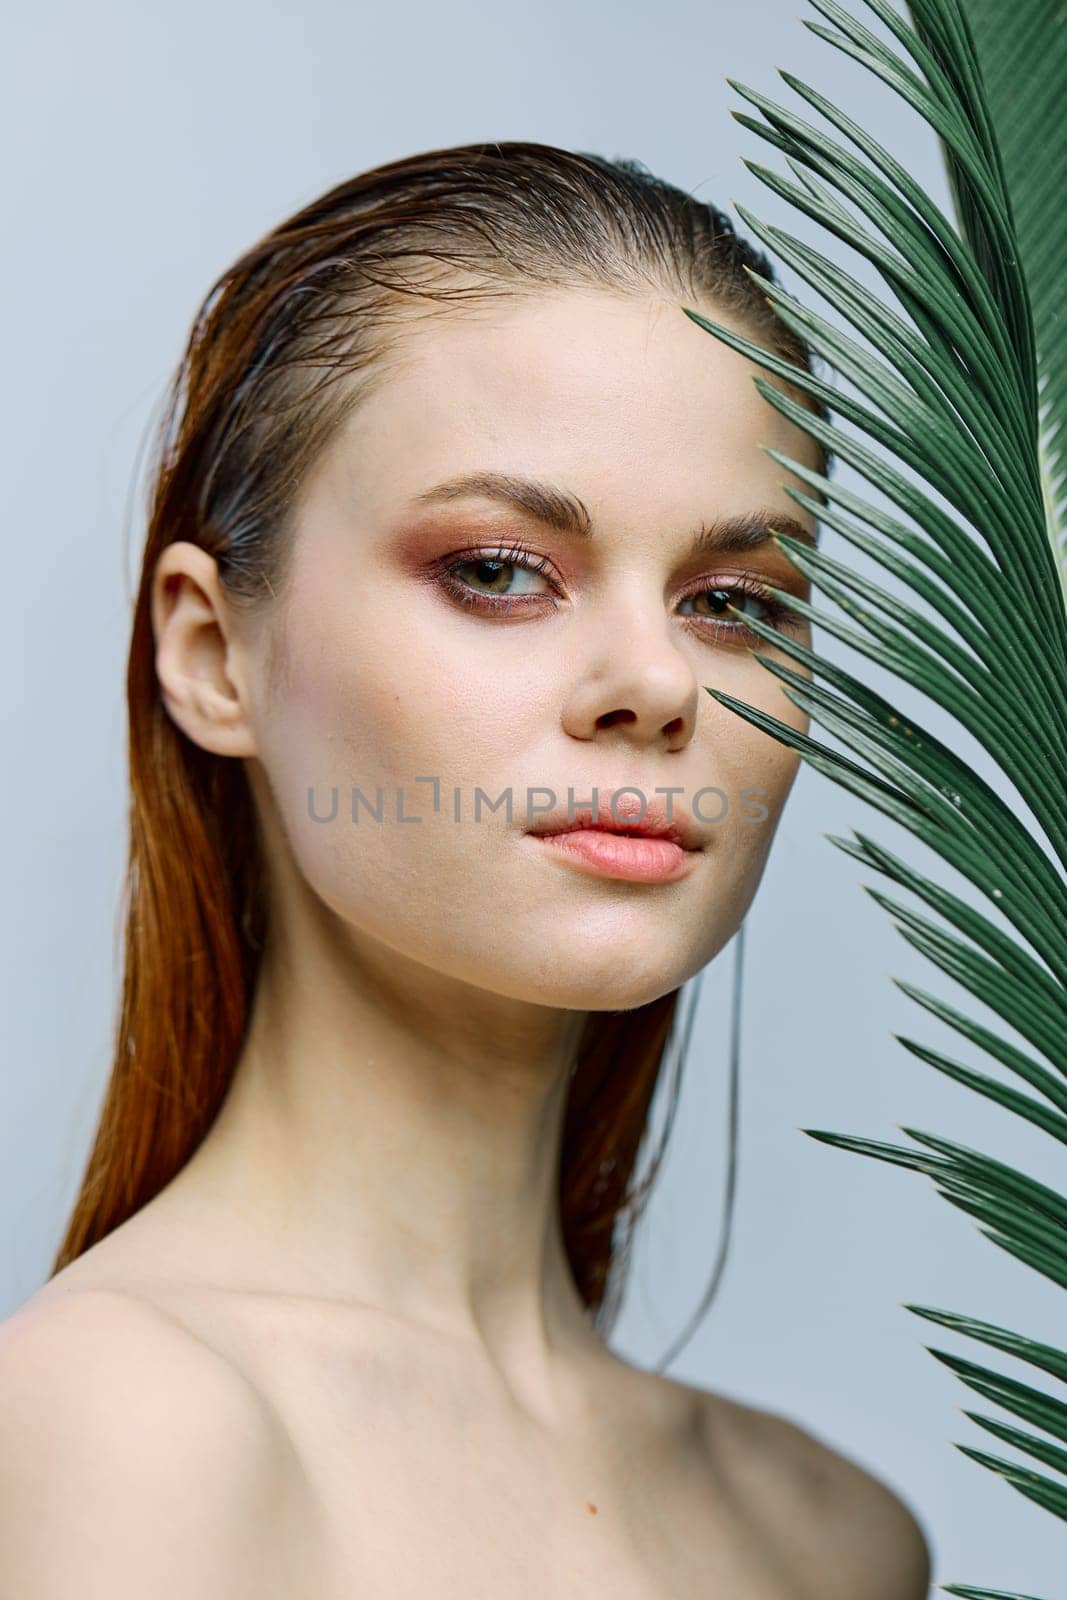 a close beauty portrait of a beautiful woman standing on a light background holding a palm leaf near her face, looking into the camera. Vertical photo without retouching of problem skin. High quality photo